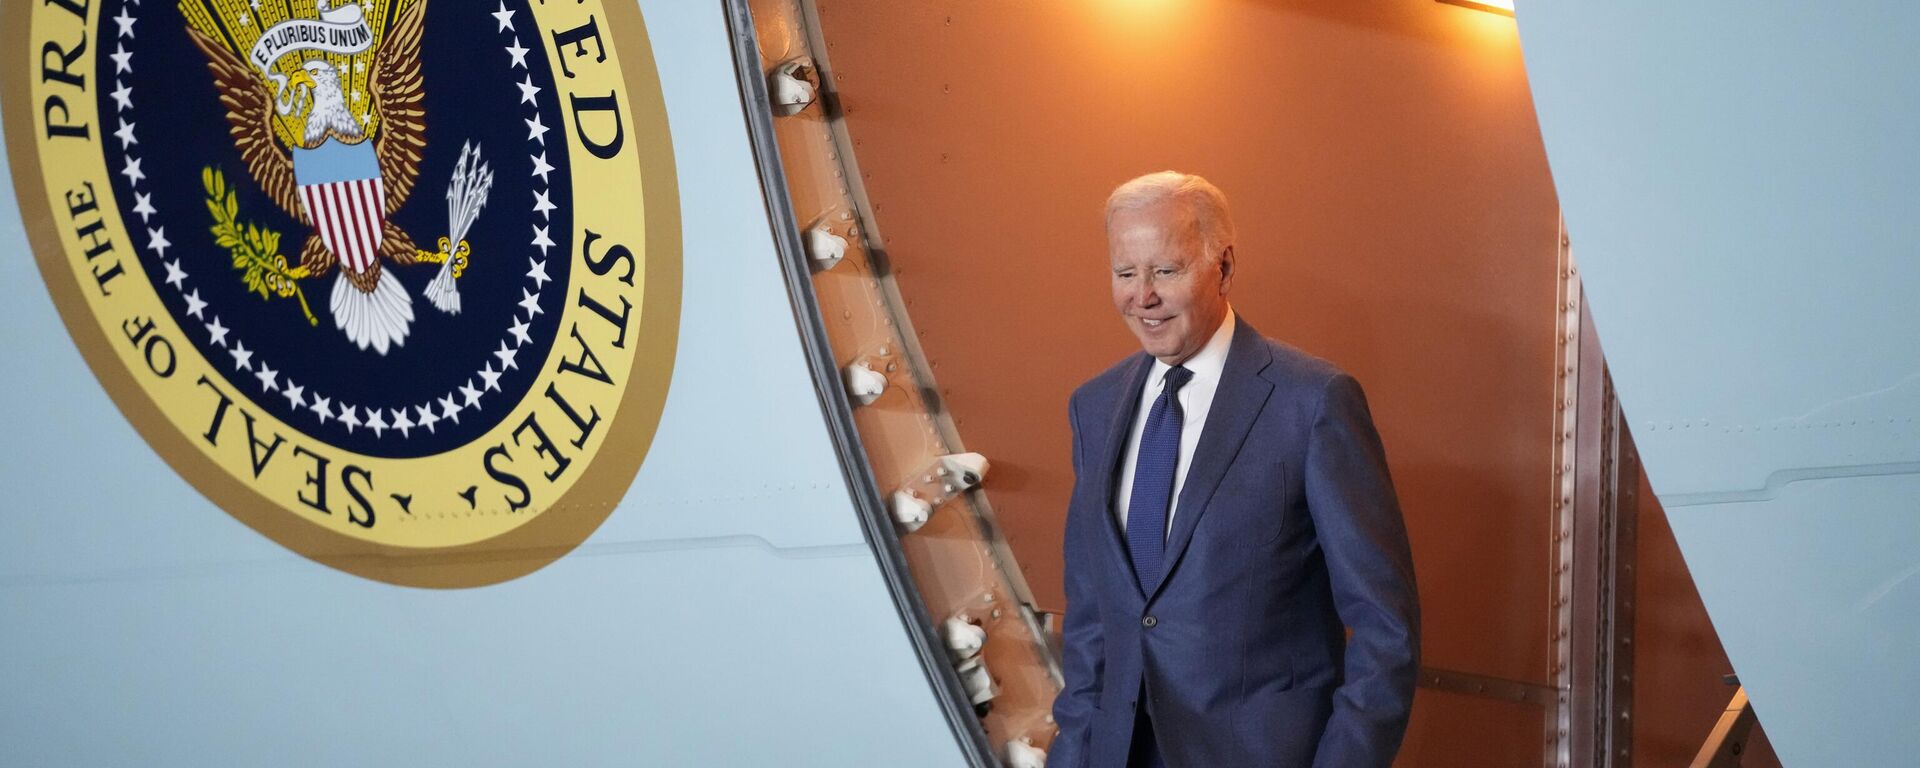 President Joe Biden steps off Air Force One at Belfast International Airport in Belfast, Northern Ireland, Tuesday, April 11, 2023. Biden is visiting the United Kingdom and Ireland in part to help celebrate the 25th anniversary of the Good Friday Agreement. - Sputnik International, 1920, 11.04.2023